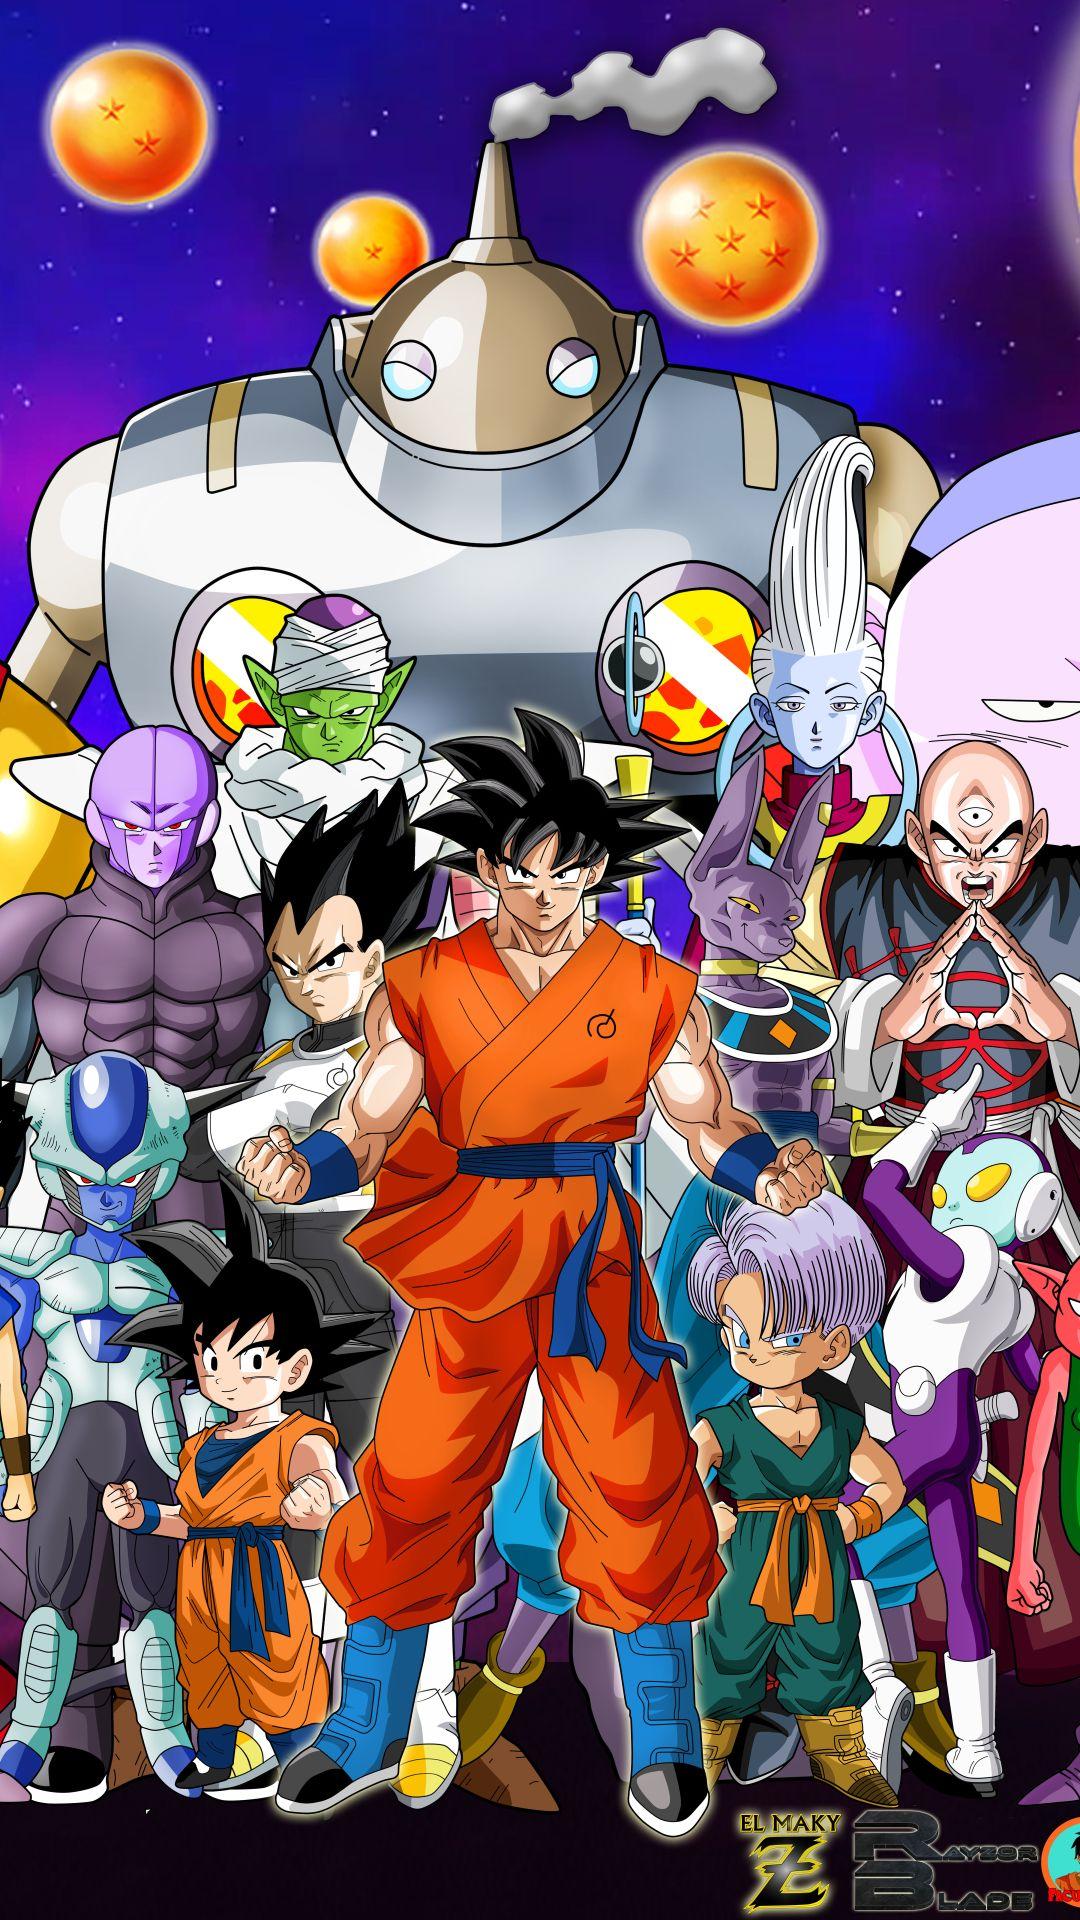 Dragon Ball Z Iphone Wallpapers Top Free Dragon Ball Z Iphone